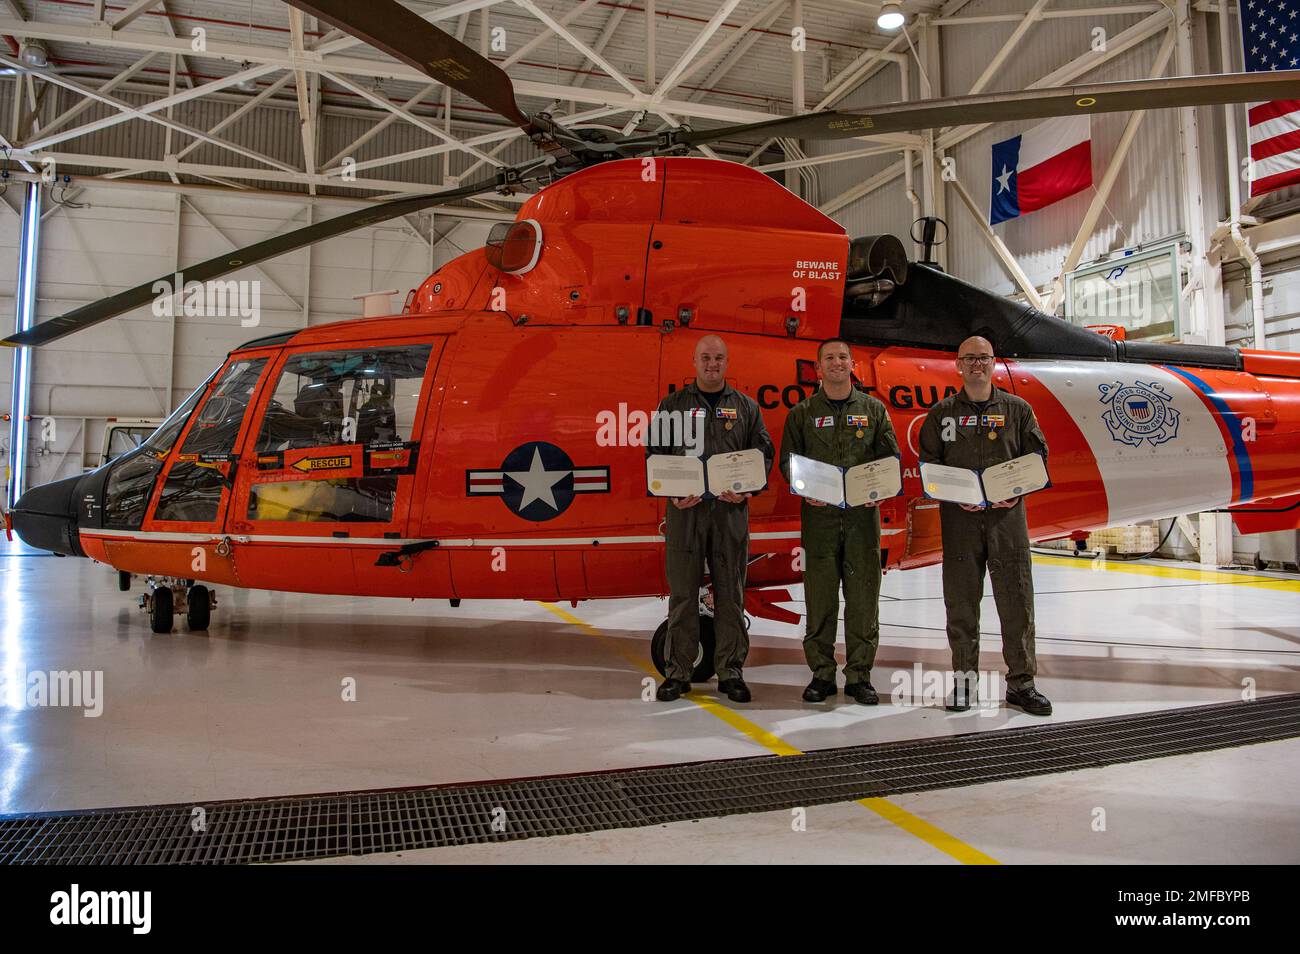 Cmdr. James Conner, an MH-65 Dolphin helicopter pilot, Petty Officer 1st Class Vincent Neiman, an aviation survival technician, and Petty Officer 2nd Class Christopher Collins, an aviation maintenance technician, pose for a photo after reciving Air Medals during an award ceremony at Coast Guard Air Station Houston, Texas, Aug. 19, 2022. During the ceremony, Rear Adm. Richard V. Timme, commander, Coast Guard District Eight, presented Conner, Neiman and Collins with Air Medals for rescuing nine trapped crew members from the Pride Wisconsin, a decommissioned mobile offshore drilling unit that cau Stock Photo